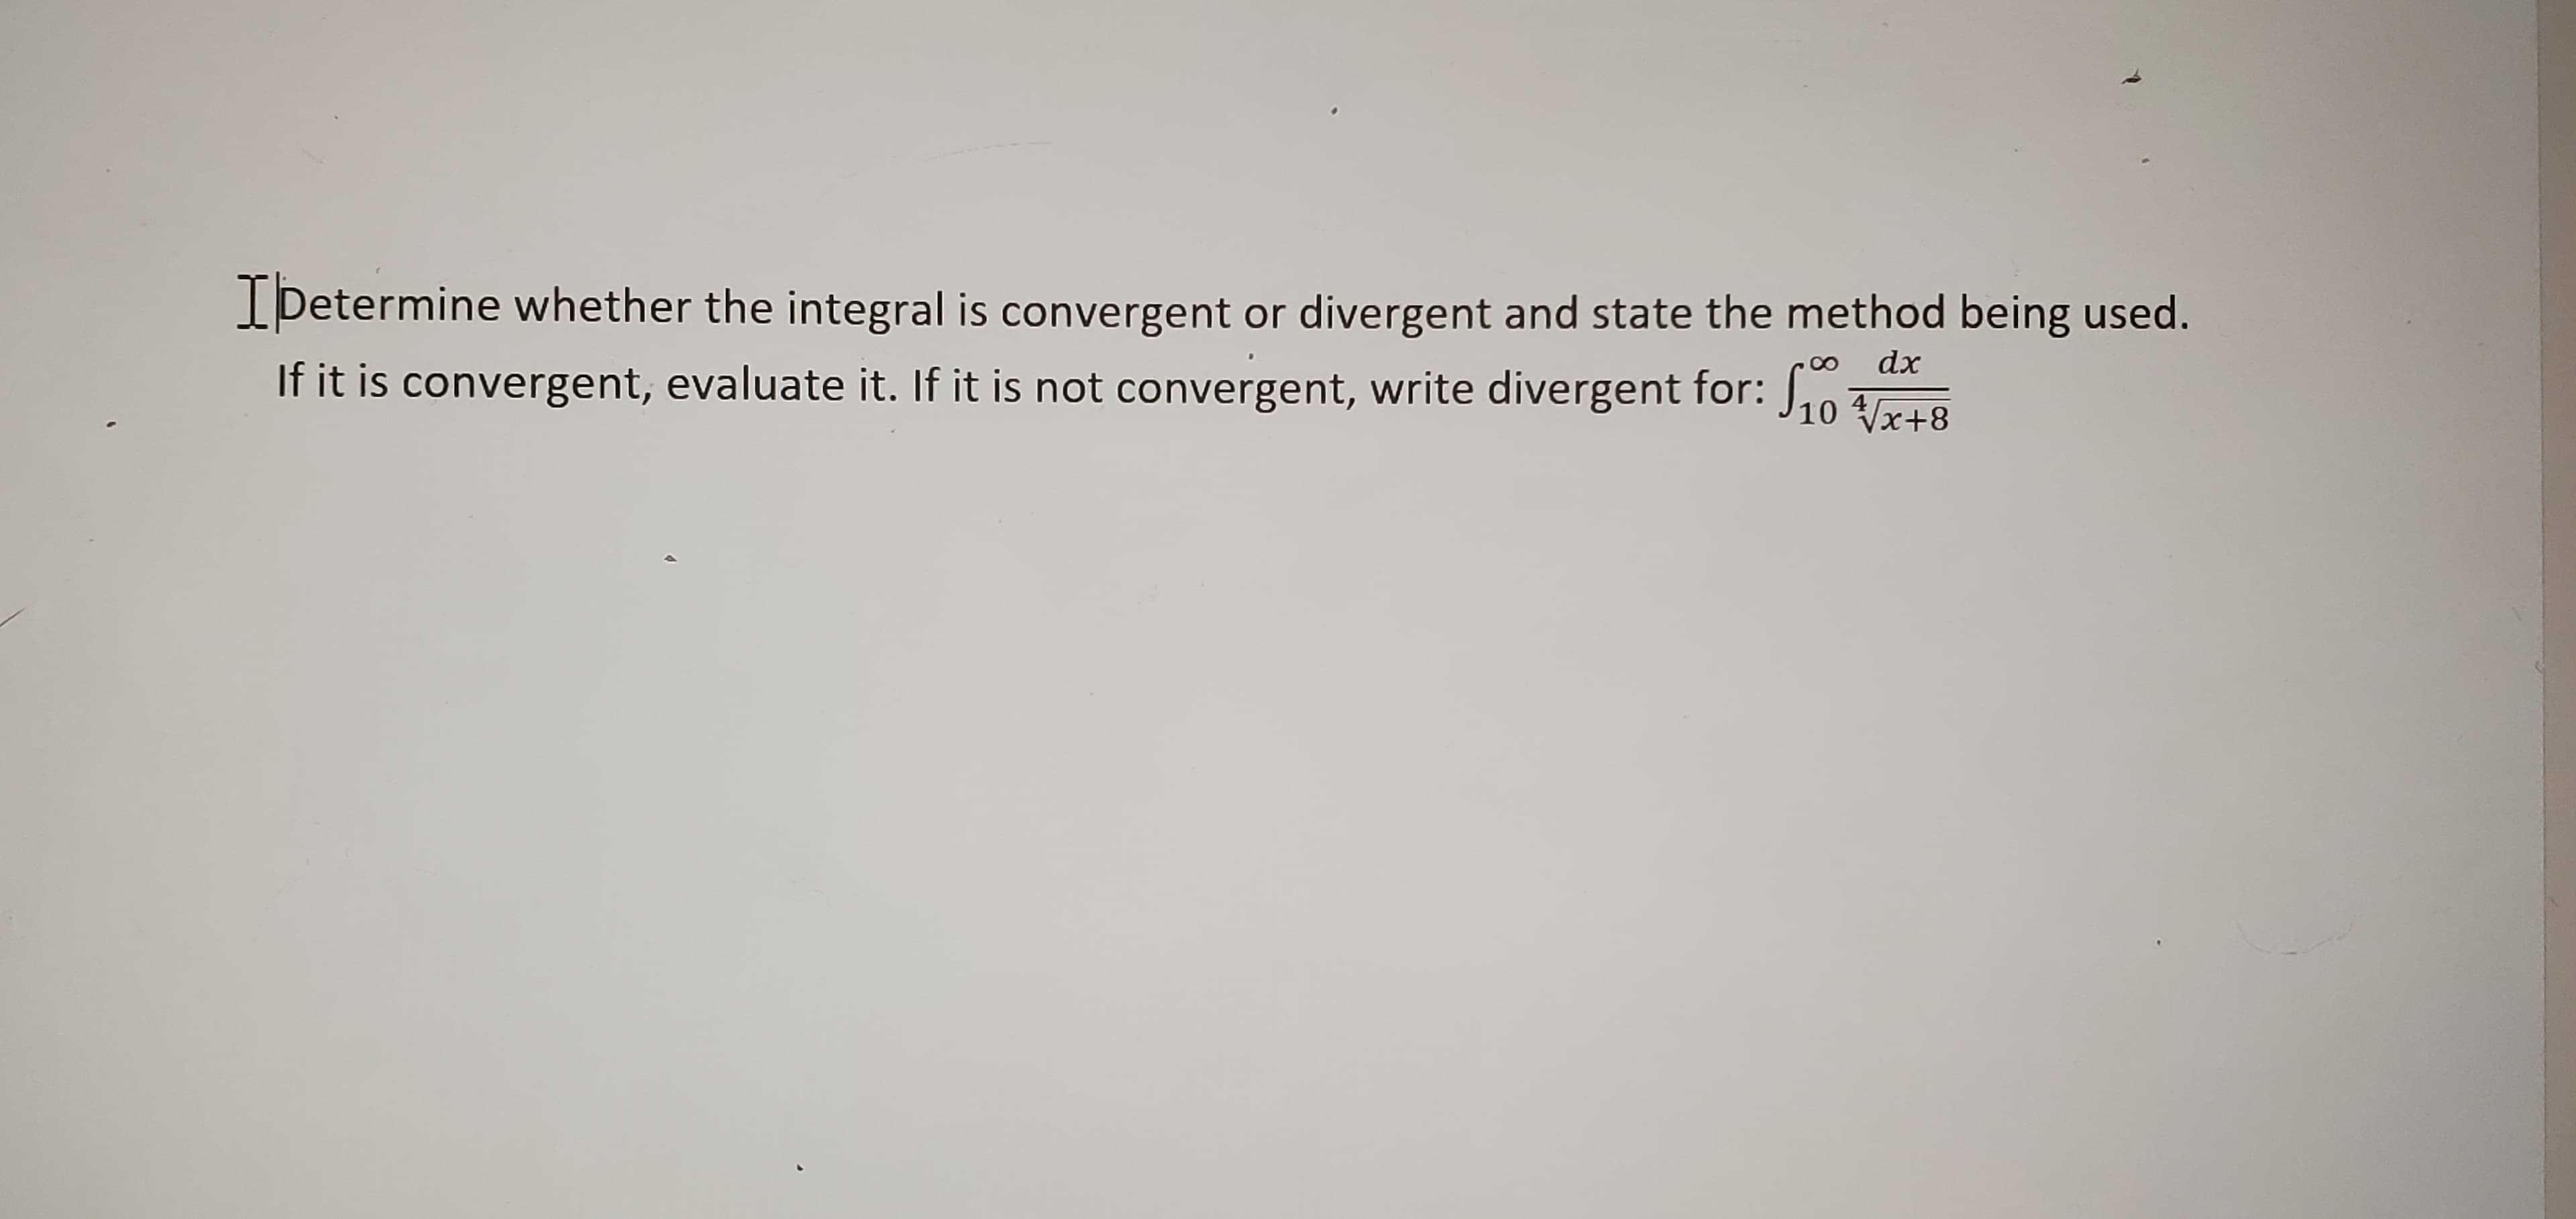 Determine whether the integral is convergent or divergent and state the method being used.
dx
If it is convergent, evaluate it. If it is not convergent, write divergent for: J,0 raa
Vx+8
4
